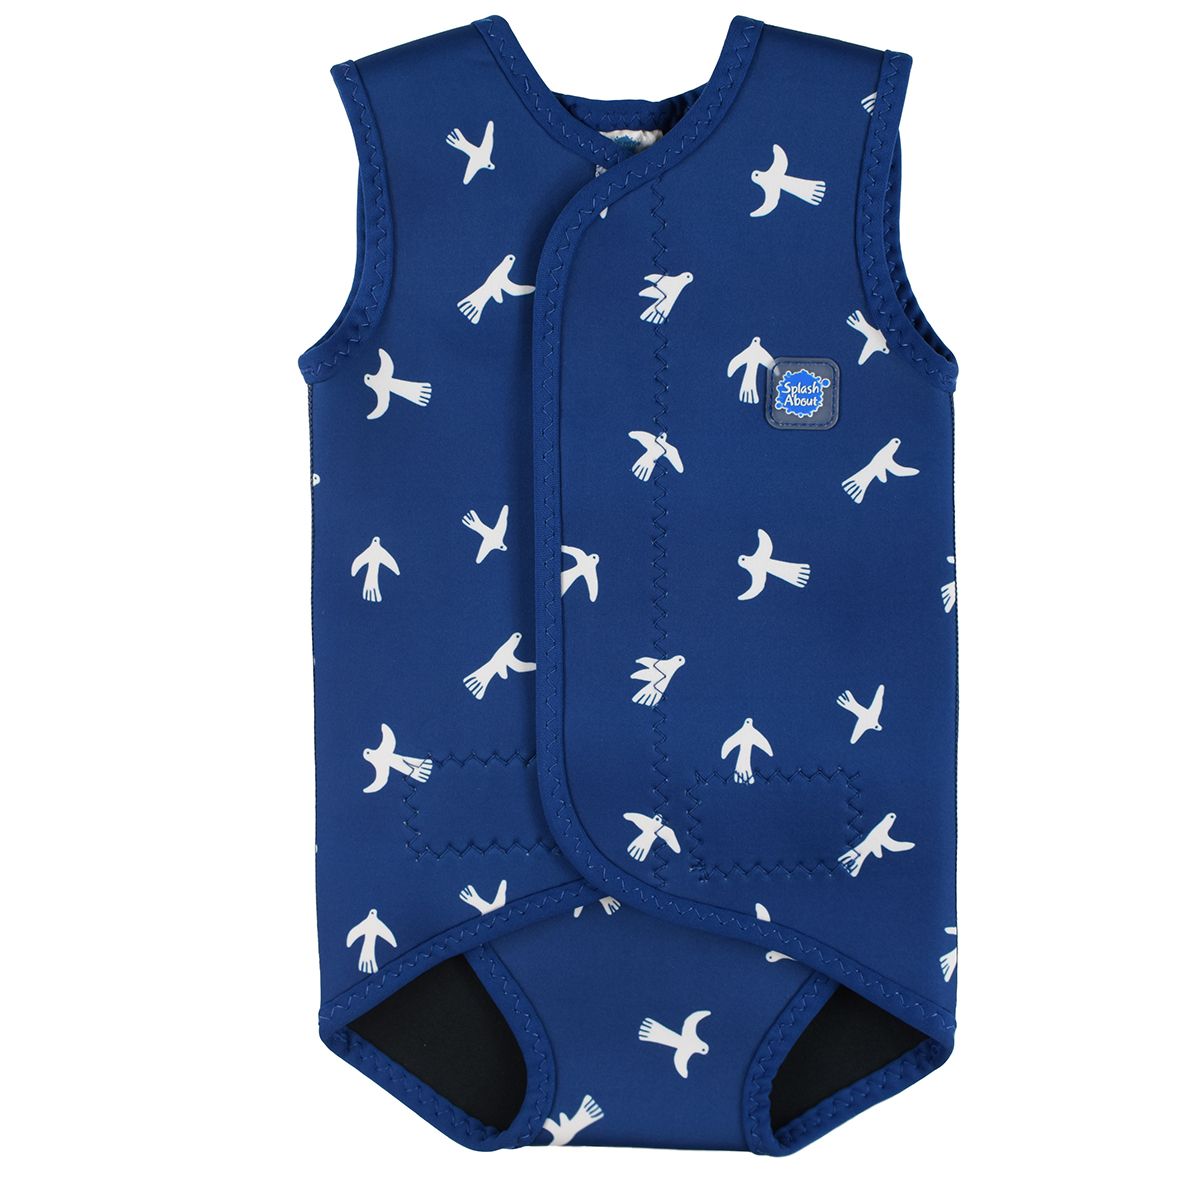 Baby Wrap wetsuit in navy blue with white doves themed print. Front.